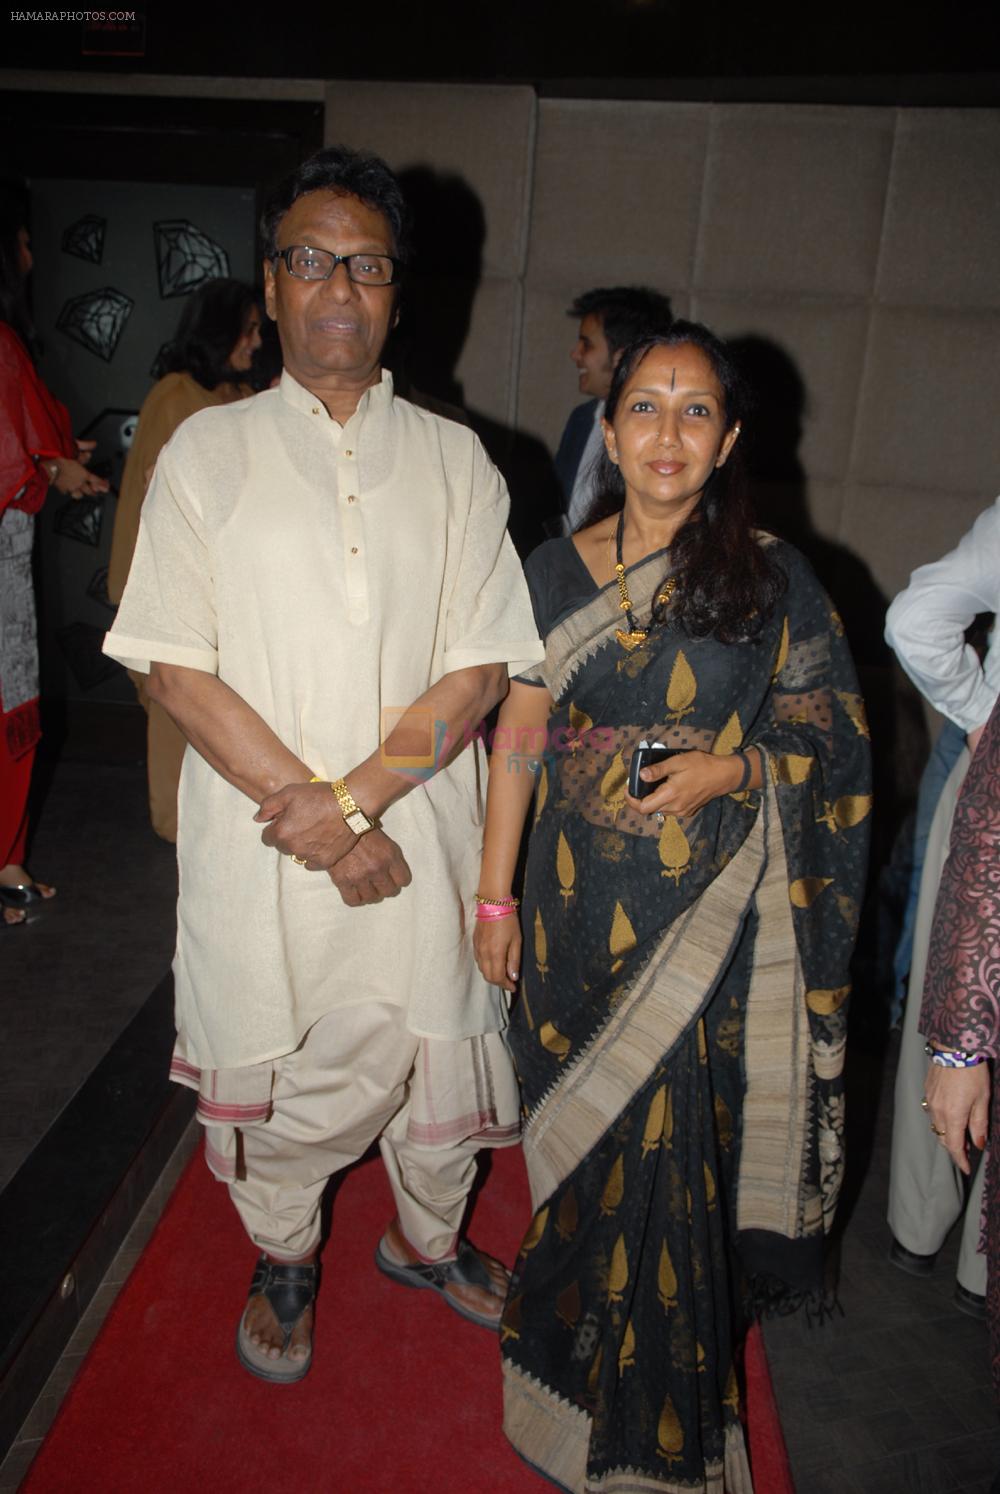 Raja and Kaushalya Reddy at the launch of singer Azaan Khan's debut album Philo- sufi in New Delhi on 30th March 2012